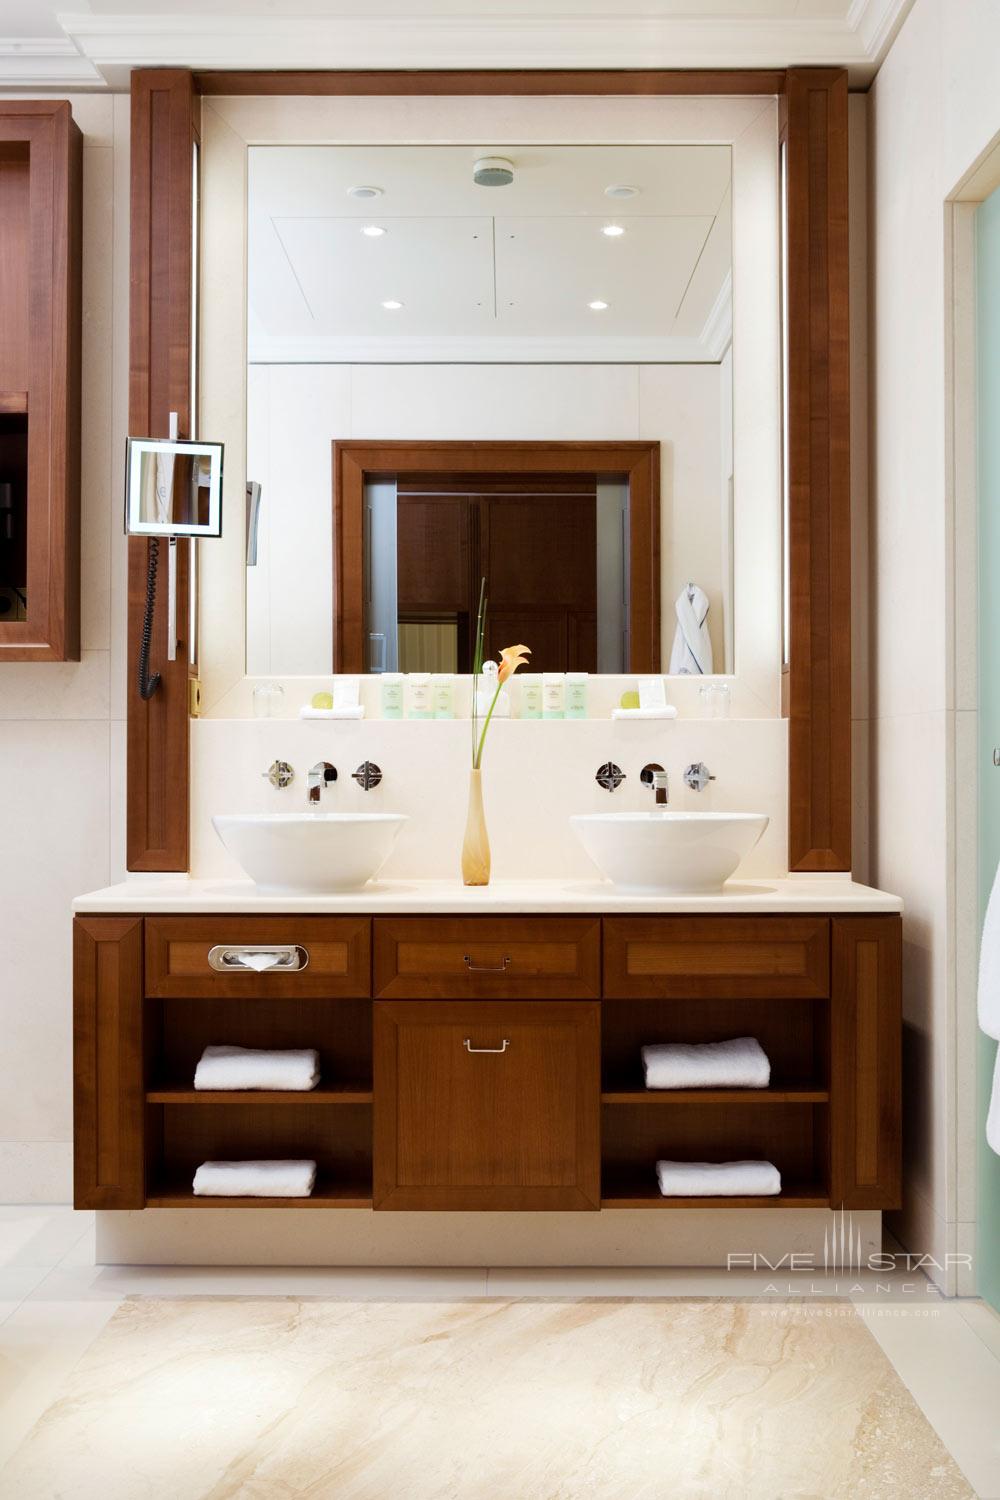 Deluxe Double Bath at Excelsior Hotel Ernst in Cologne, North-Rhein Westphalia, Germany